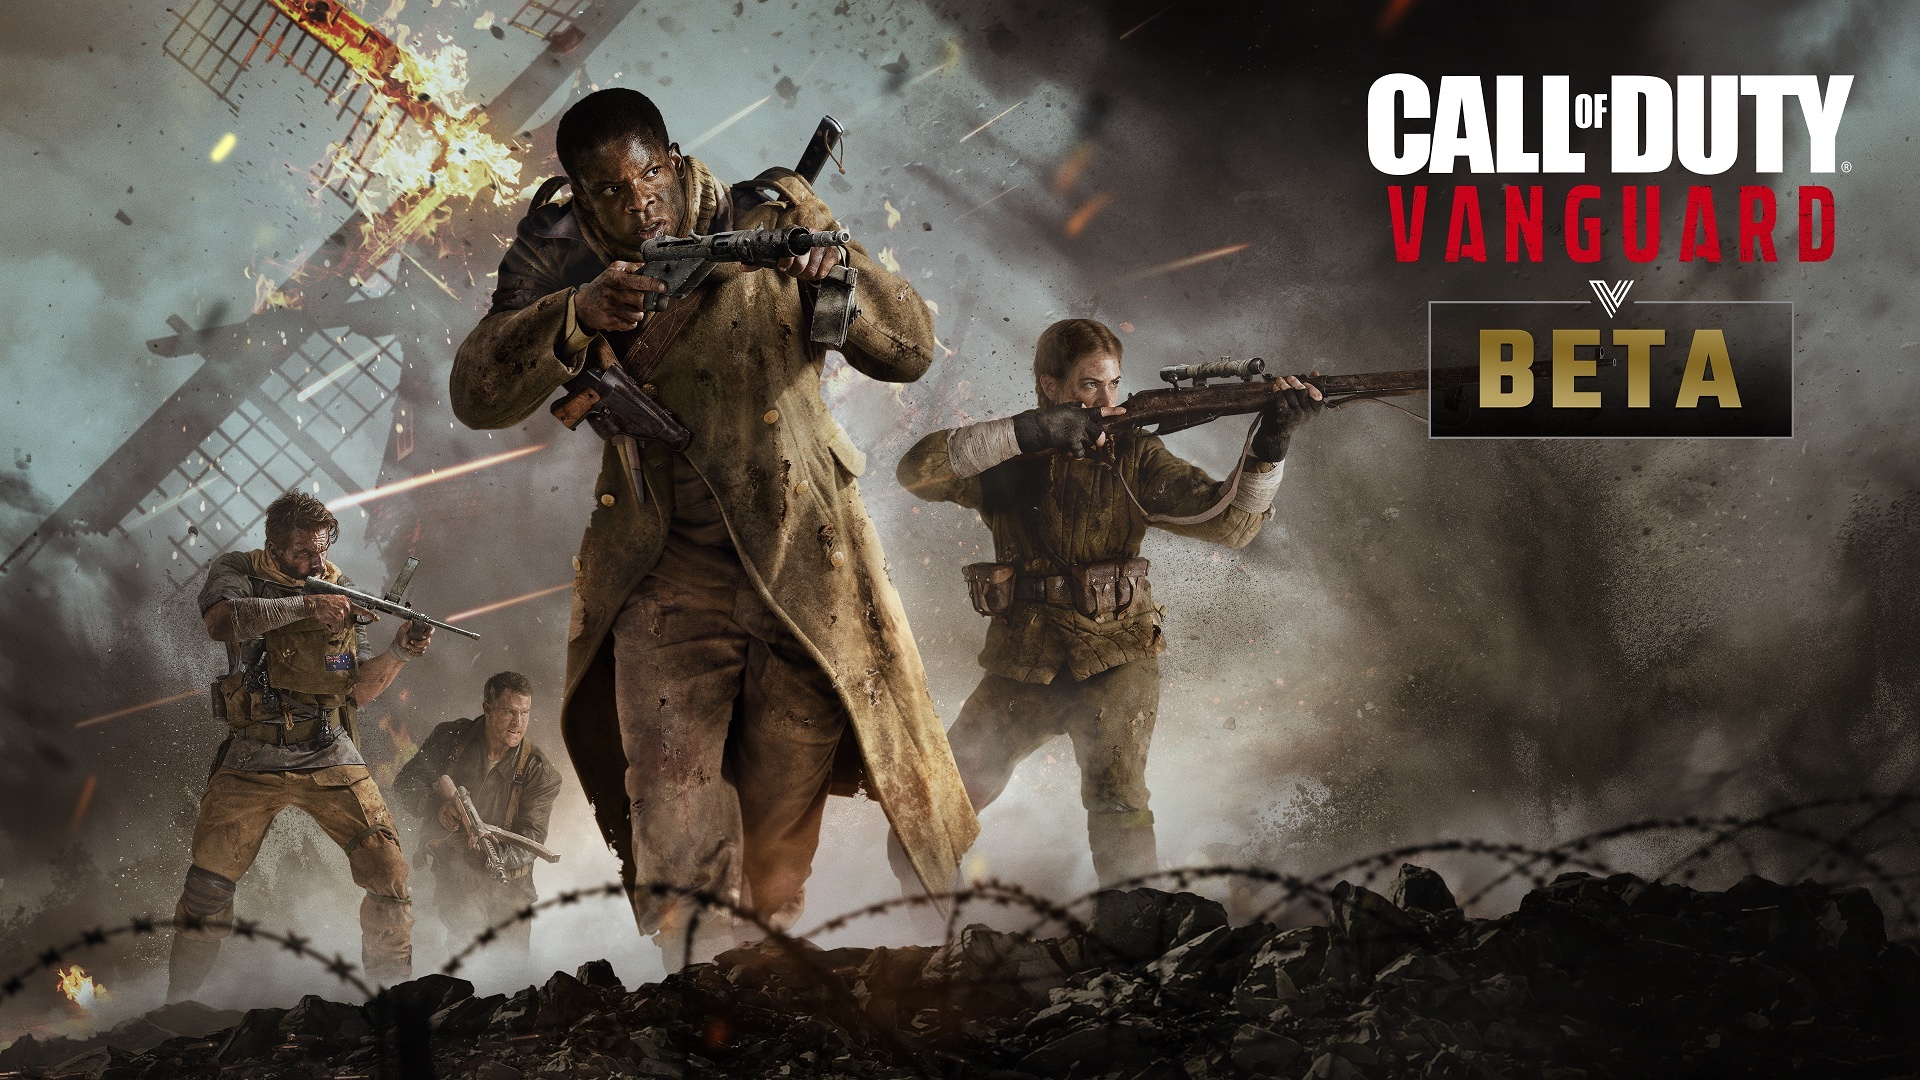 Call of Duty: Vanguard multiplayer and beta details revealed